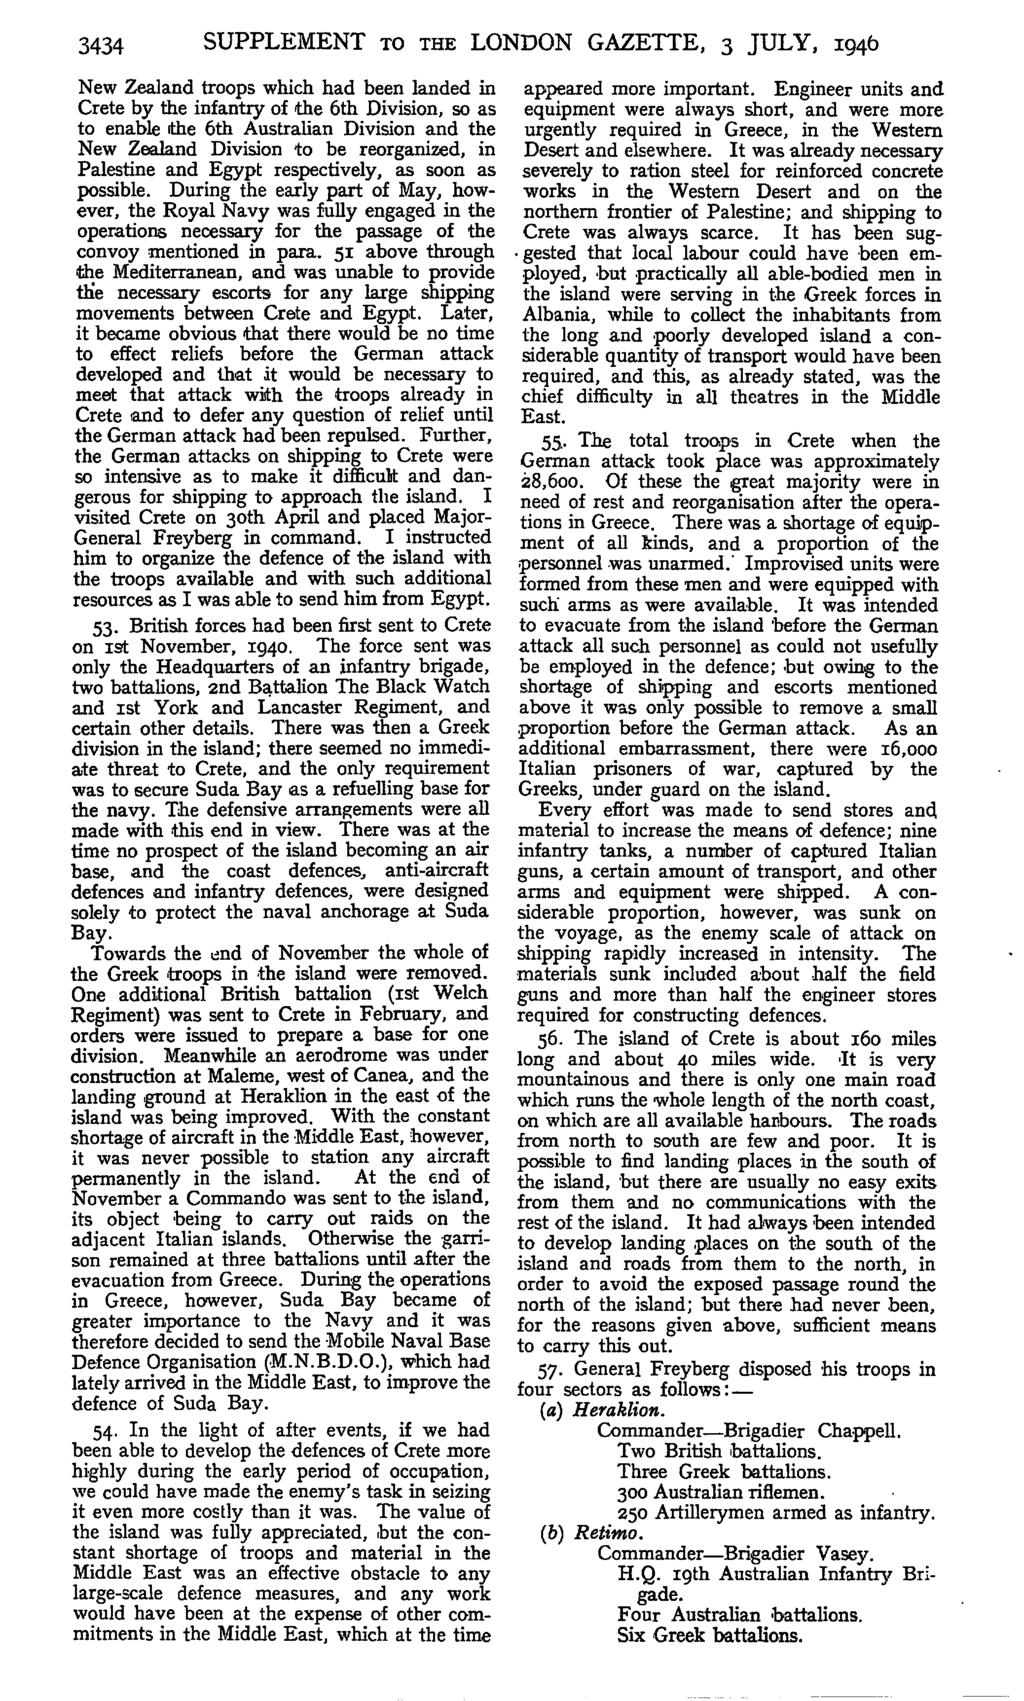 3434 SUPPLEMENT TO THE LONDON GAZETTE, 3 JULY, 1946 New Zealand troops which had been landed in Crete by the infantry of the 6th Division, so as to enable the 6th Australian Division and the New